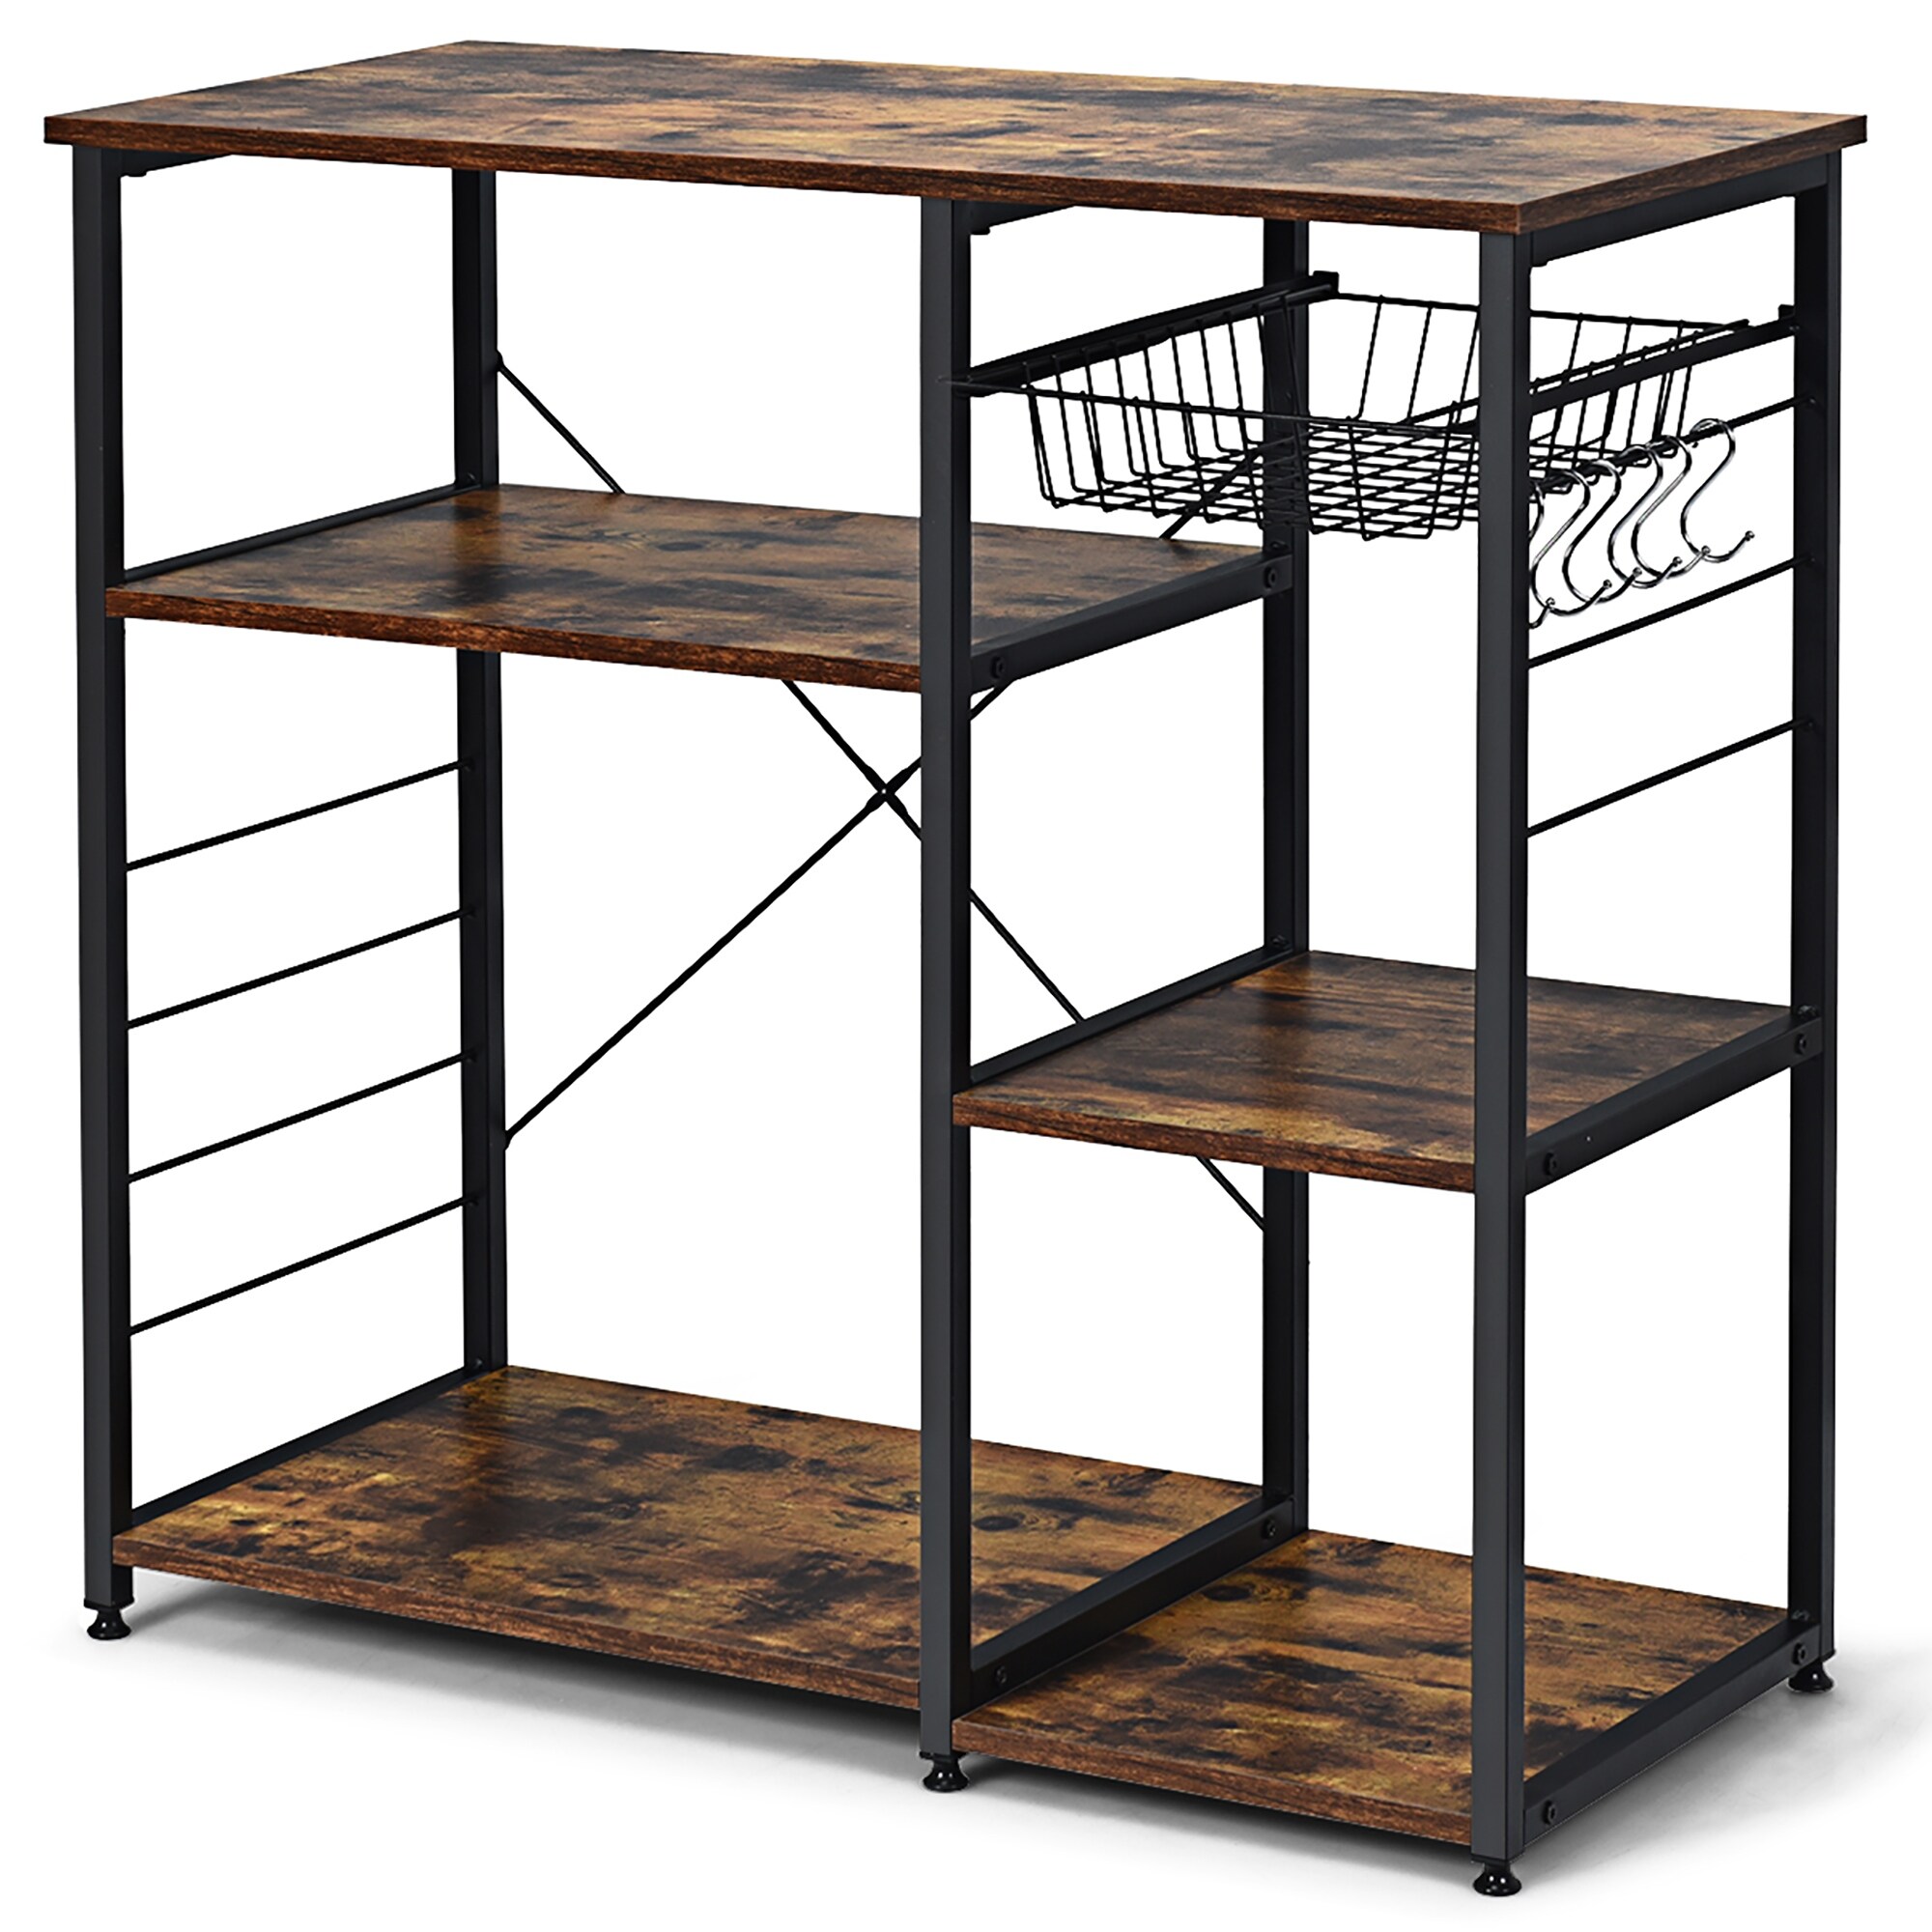 Costway Industrial Kitchen Baker's Rack Microwave Stand Utility - 35.5''x 16'' x 33.5''